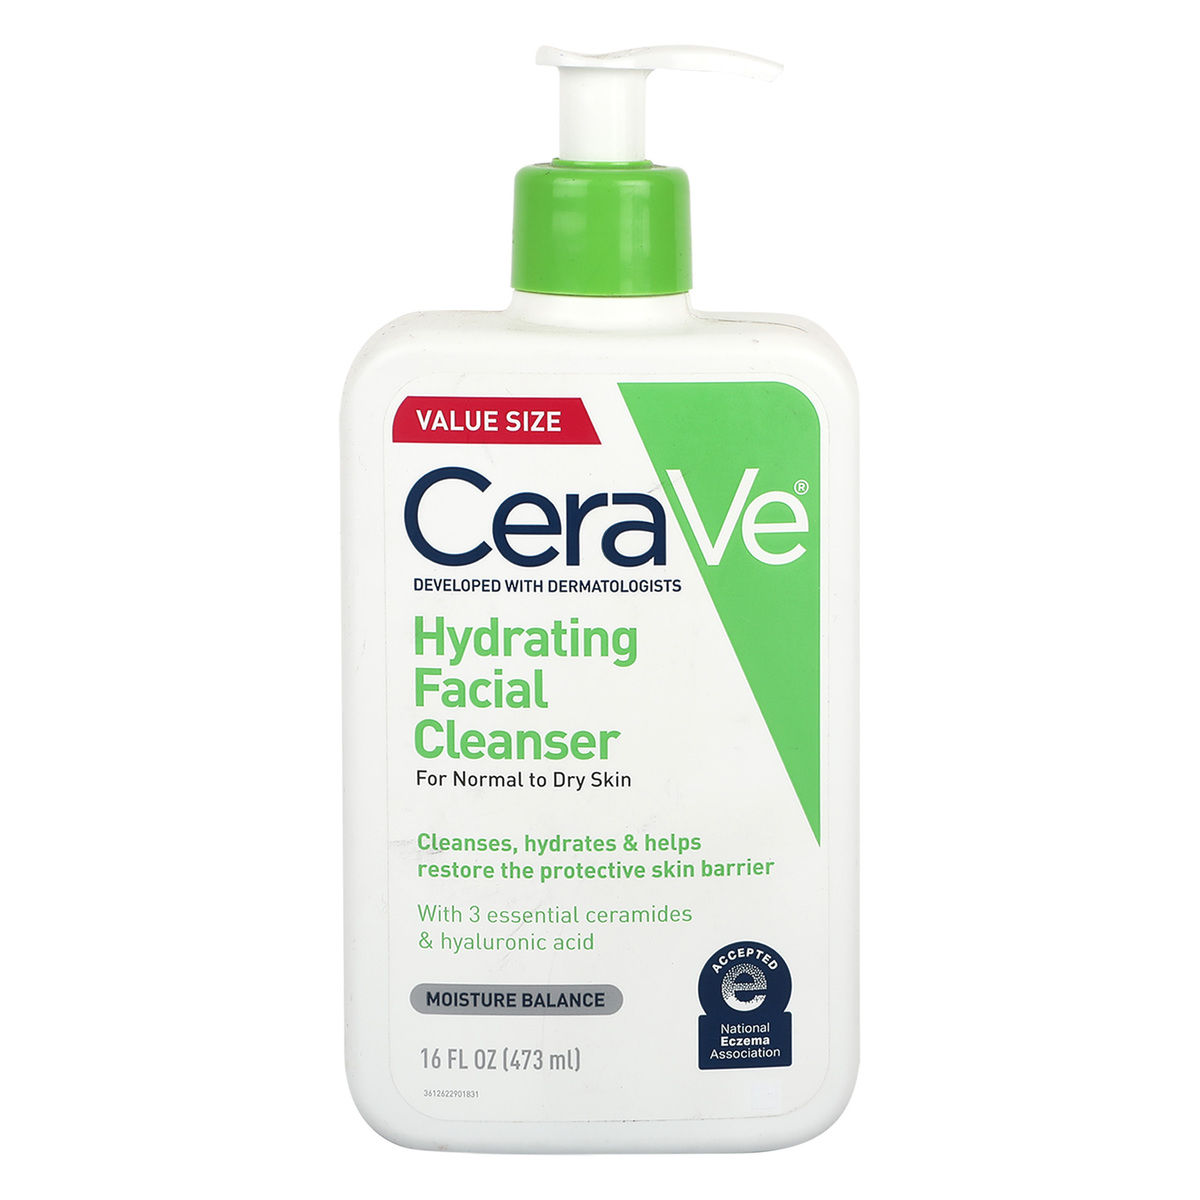 CeraVe Hydrating Facial Cleanser for Normal to Dry Skin, 473 ml